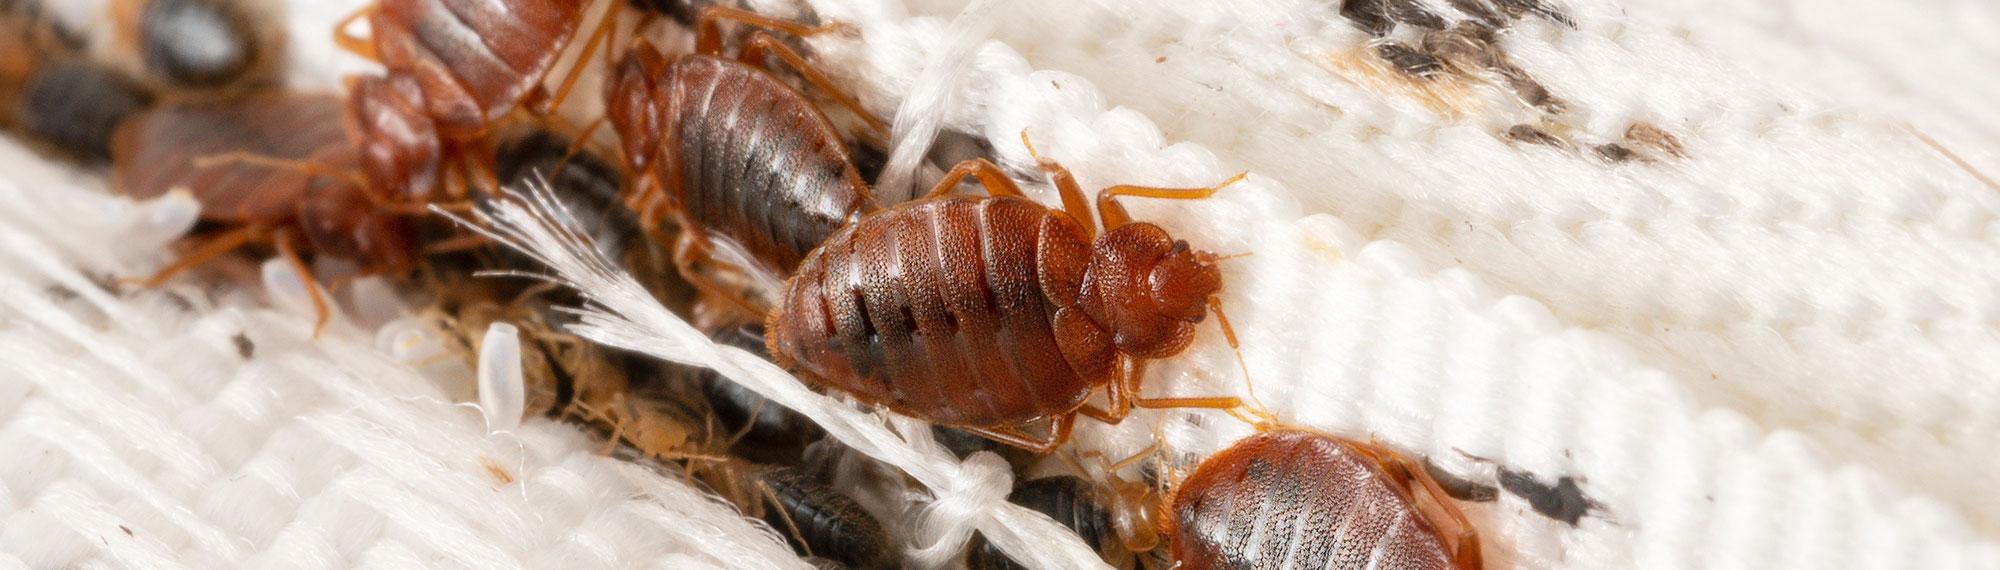 adult bed bugs, nymphs and eggs on a mattress